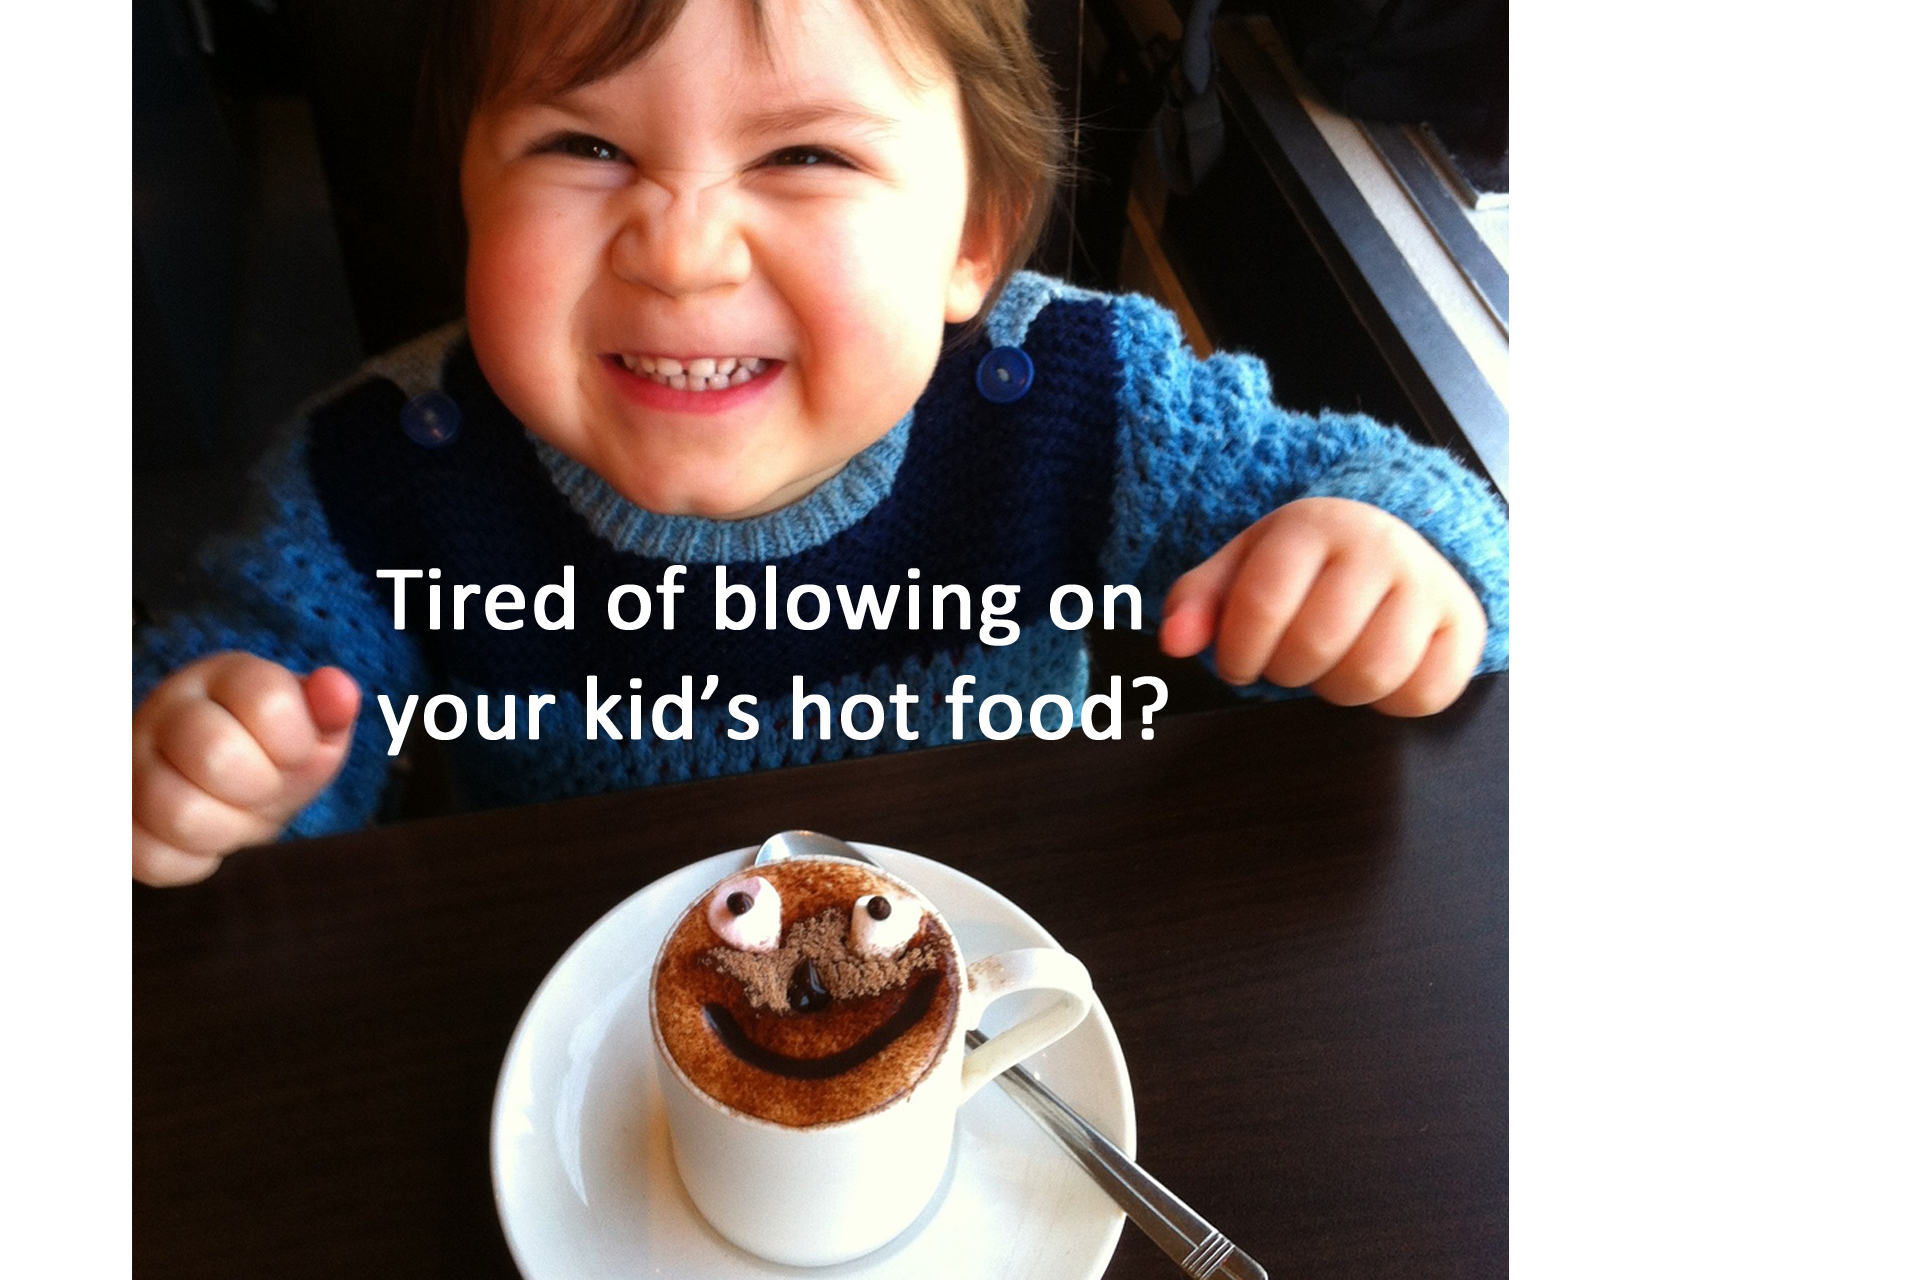 Parenting hack: How to teach your kid how to handle a plate of hot food